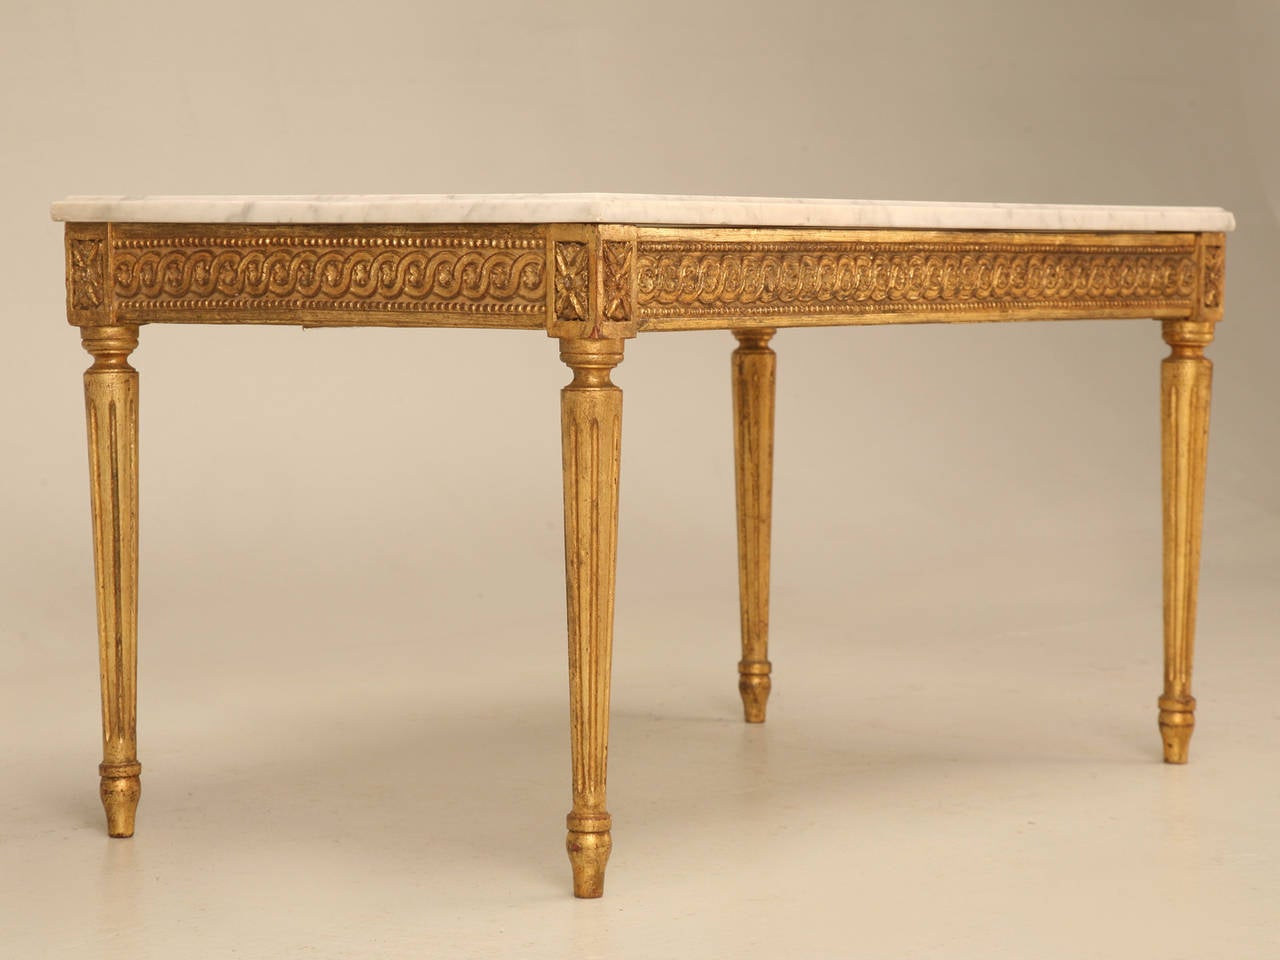 Wood Vintage French Louis XVI Style Gilded Coffee Table with Marble Top